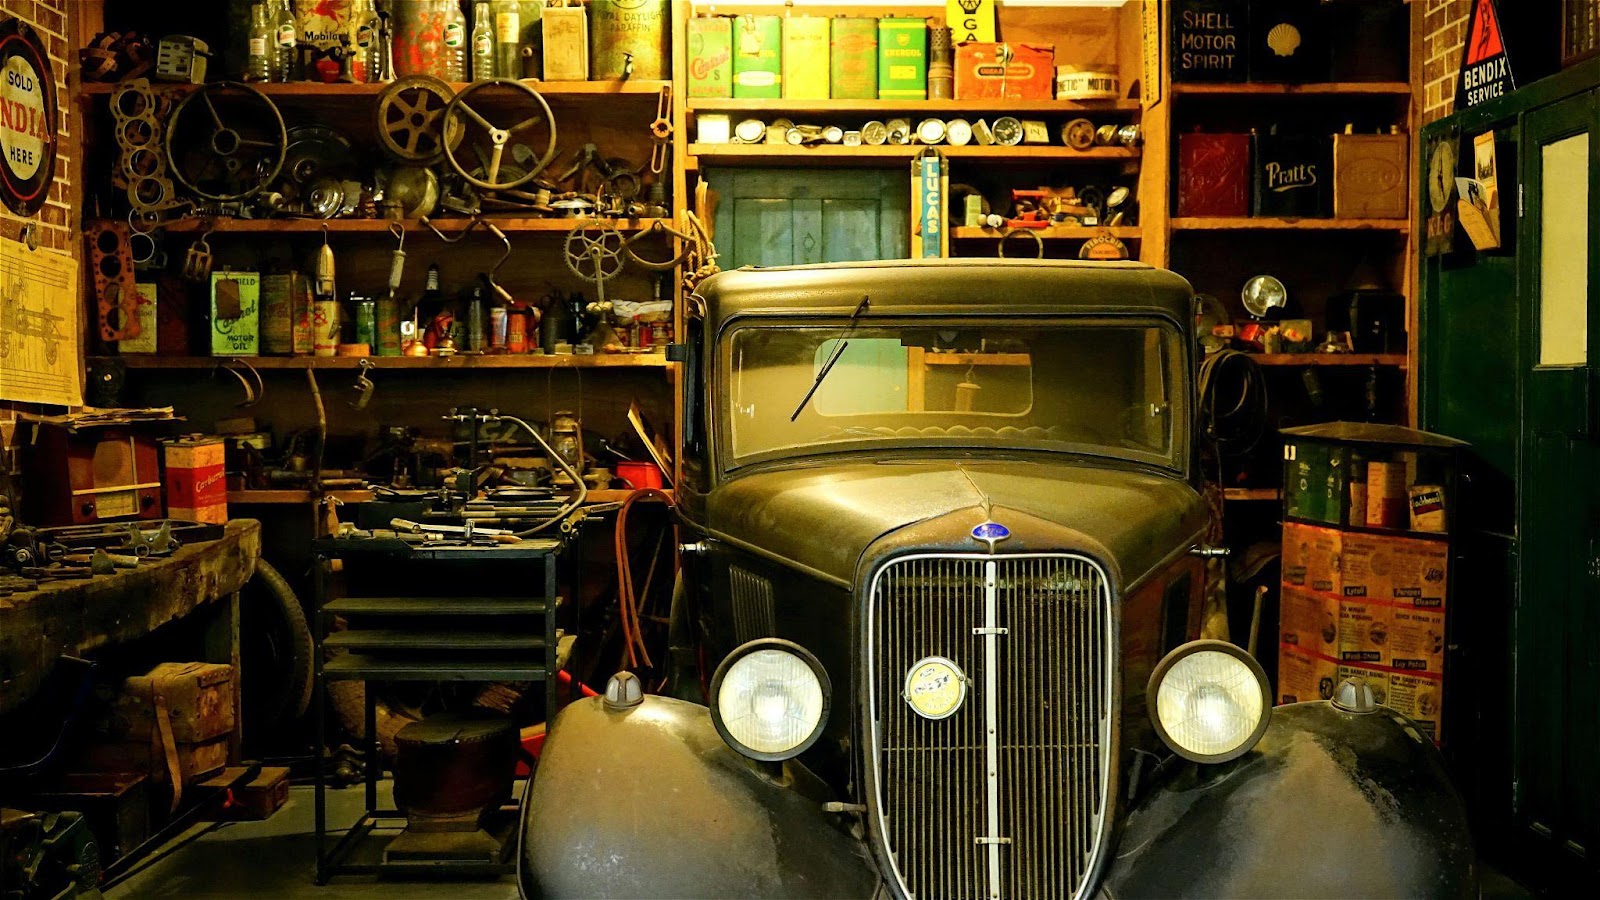 10 Helpful Tips to Maximize Your Garage Space